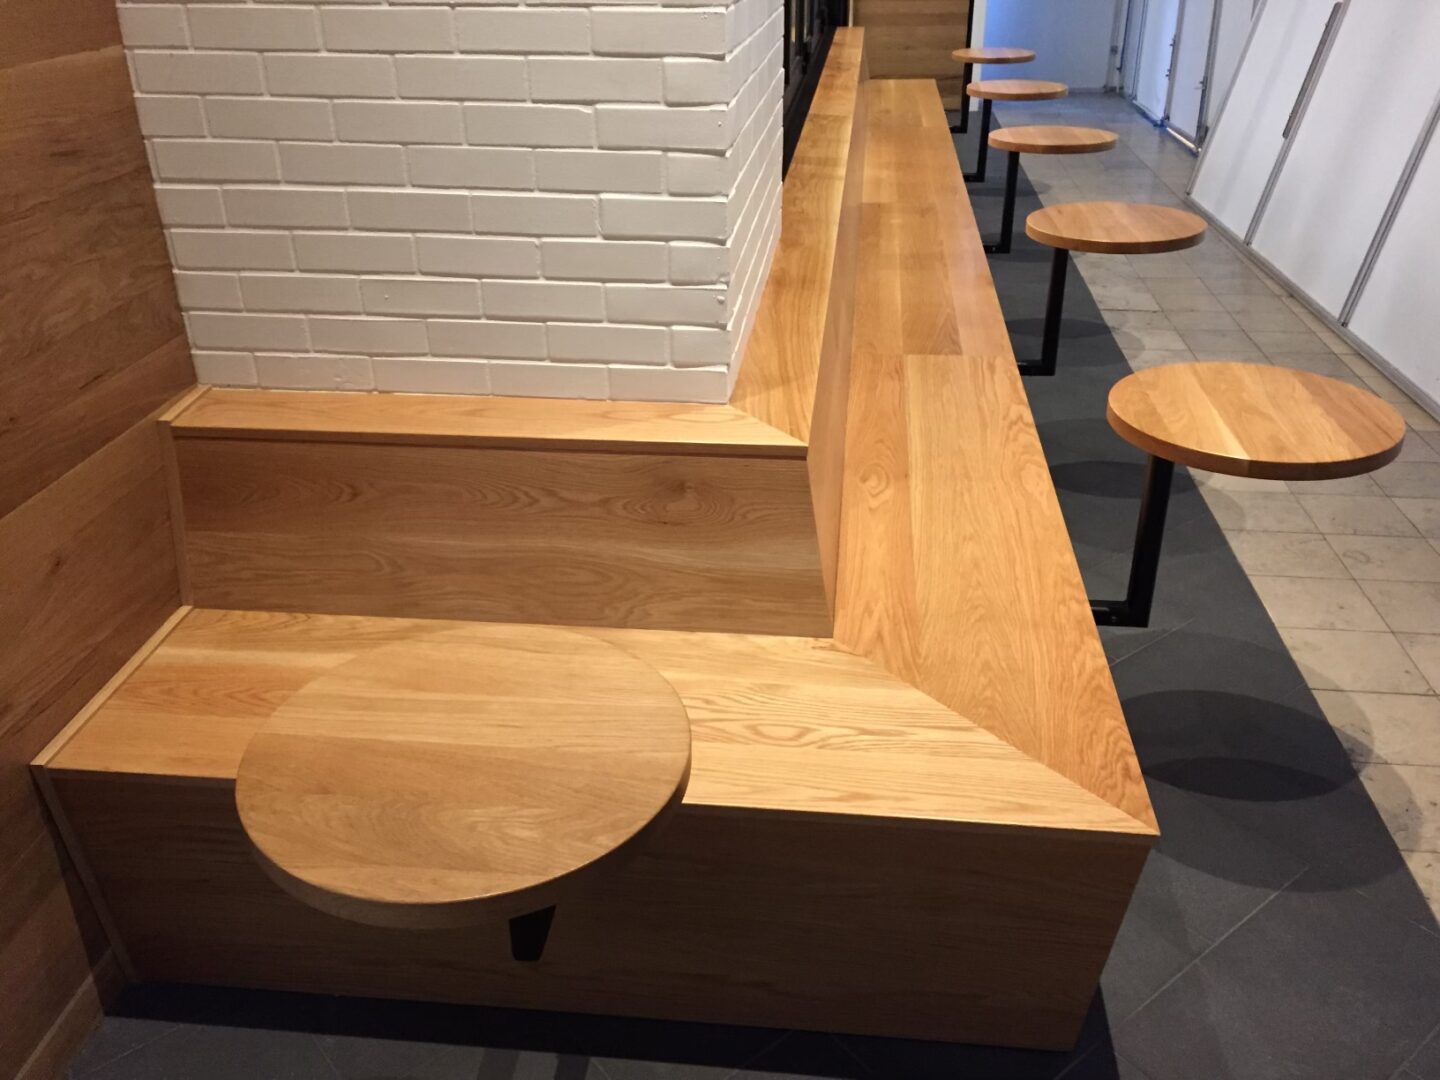 A Table With Attached Benches for Seating